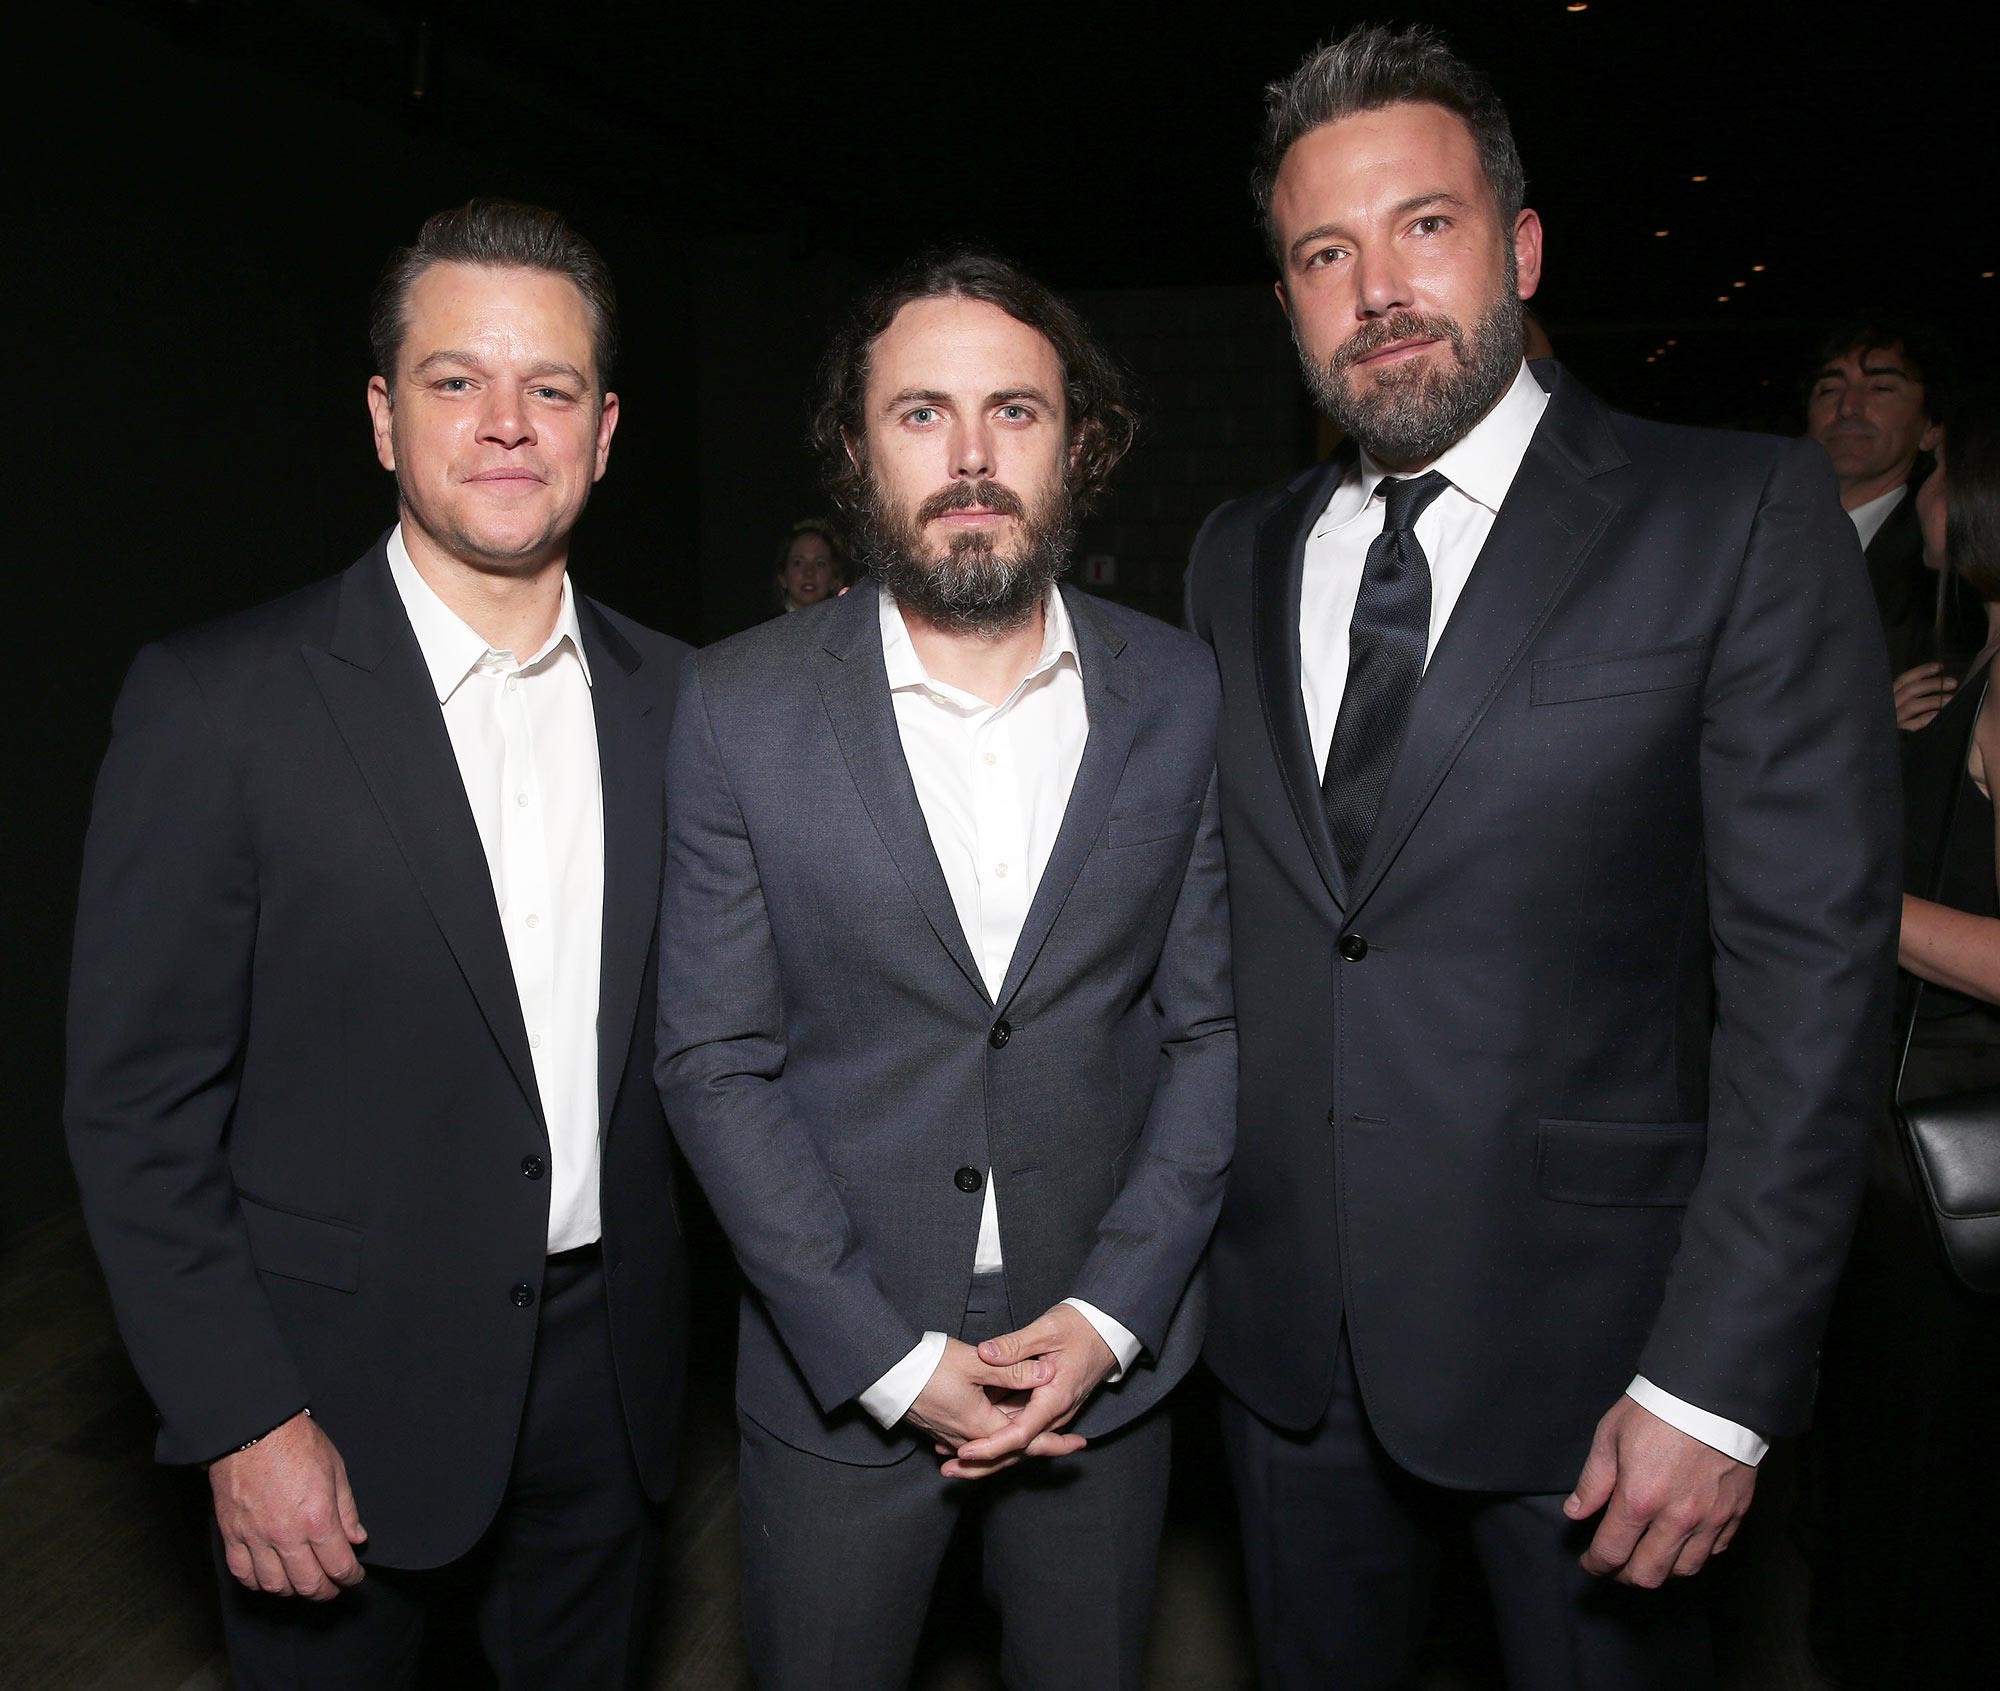 Matt Damon Says That He Gets into ‘Creative Arguments’ With Ben and Casey Affleck: ‘Those Are Healthy’